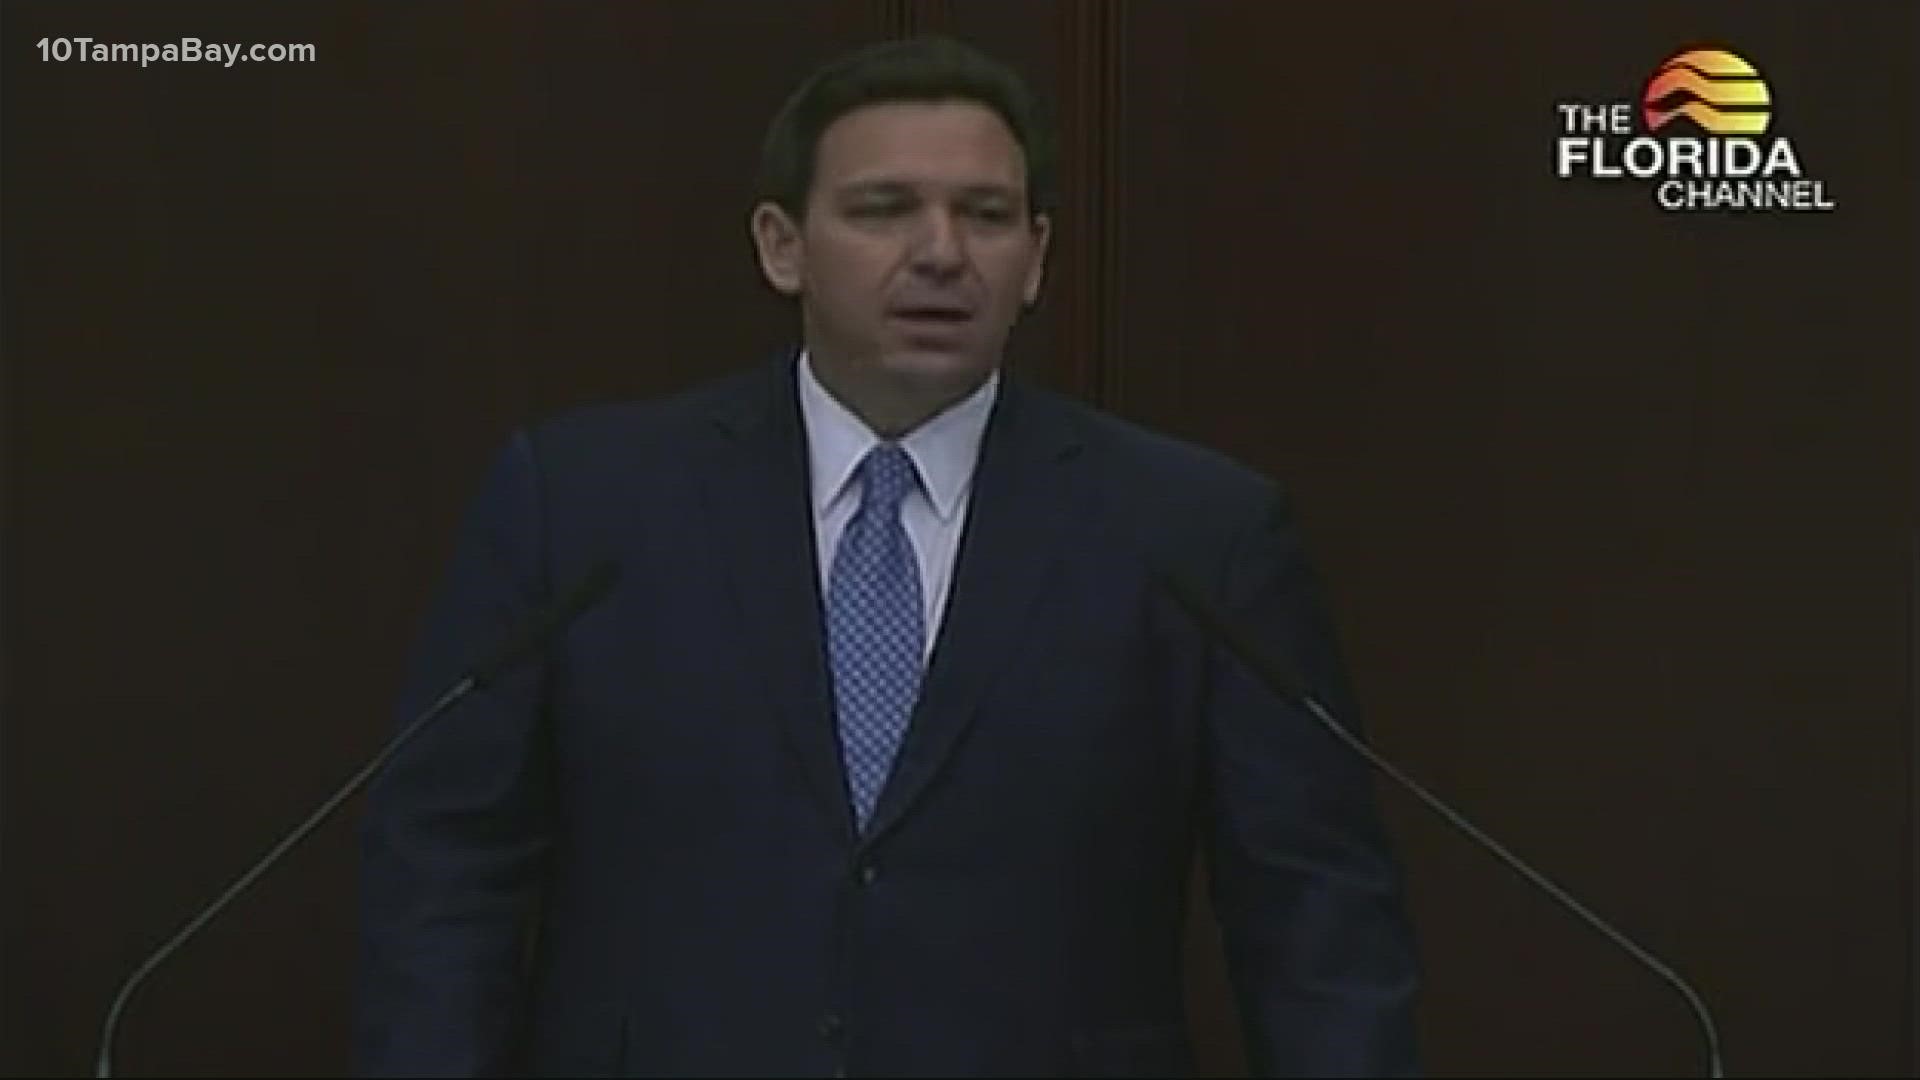 DeSantis spoke about plans of preventing schools from teaching critical race theory and keeping undocumented immigrants from settling in Florida.